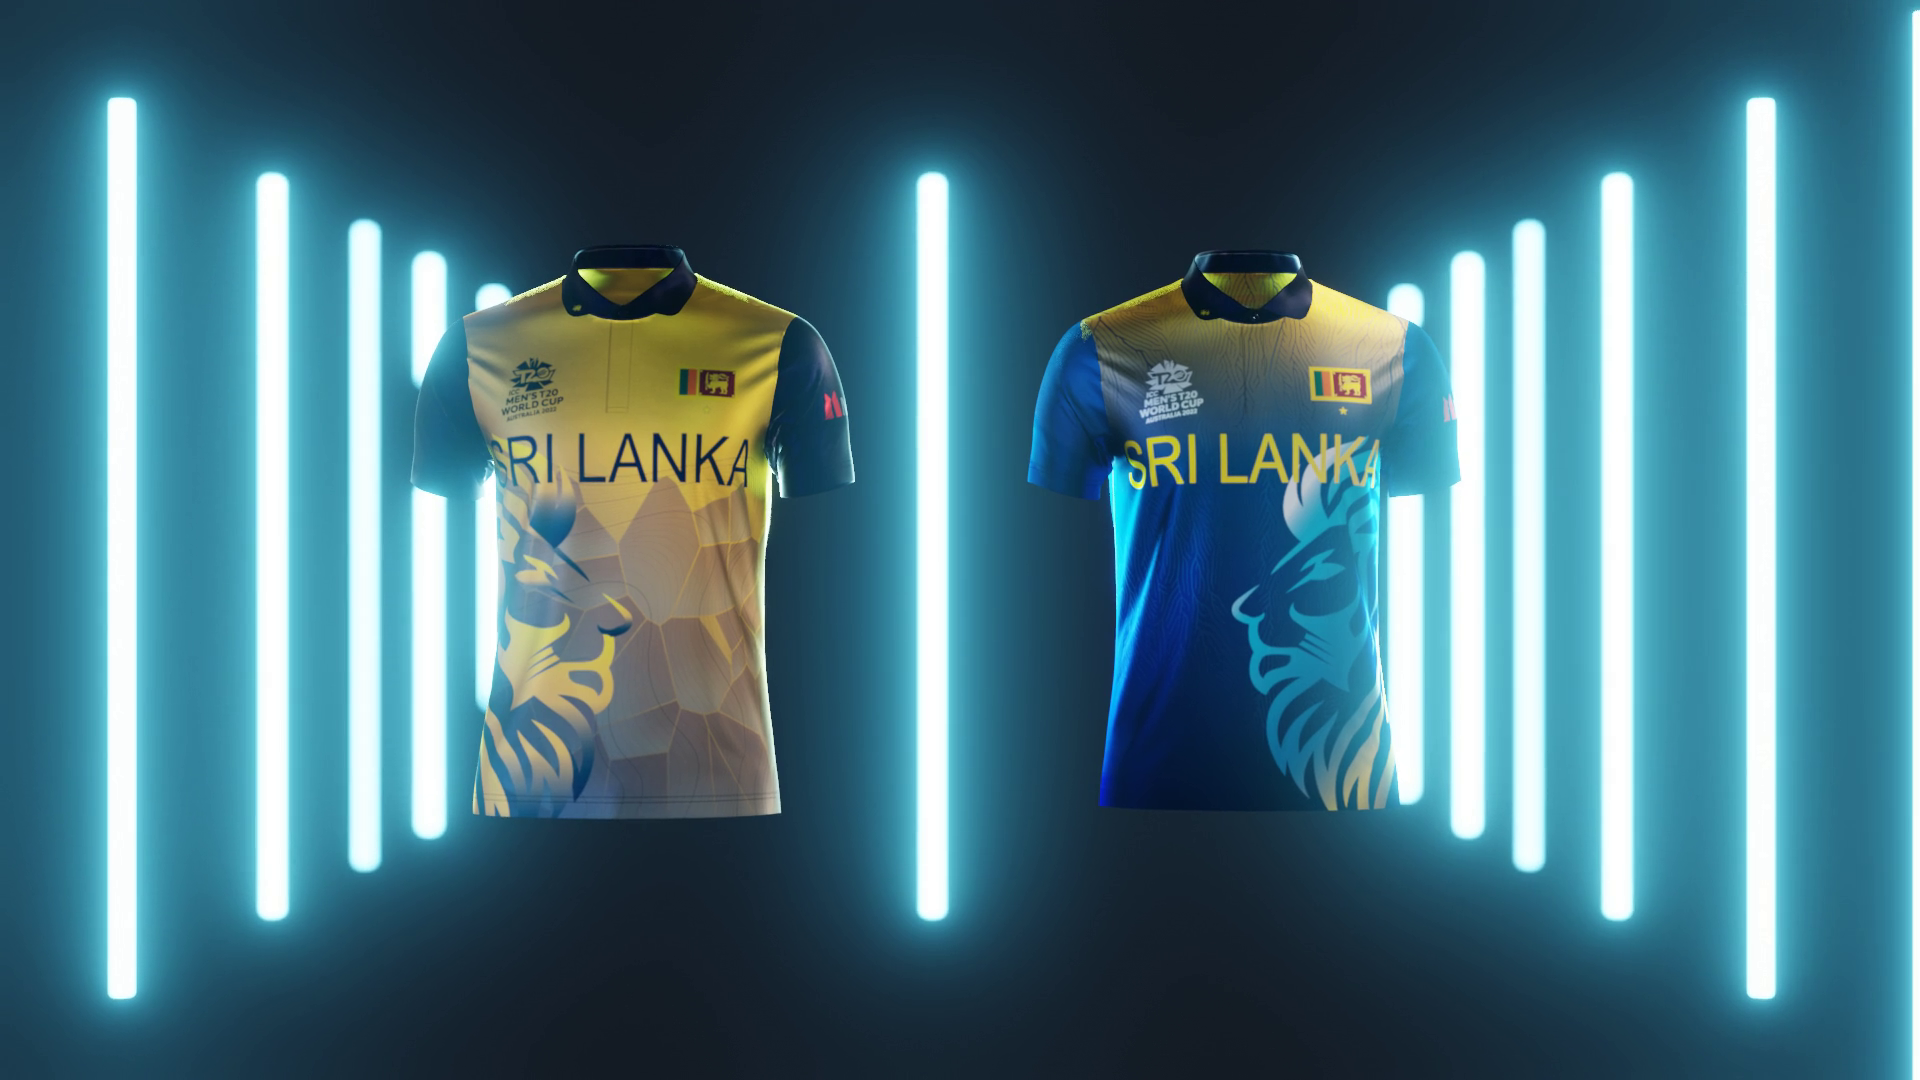 Sri Lanka Cricket Jersey T20 Jersey by MAS with Moose Logo Yellow and Blue